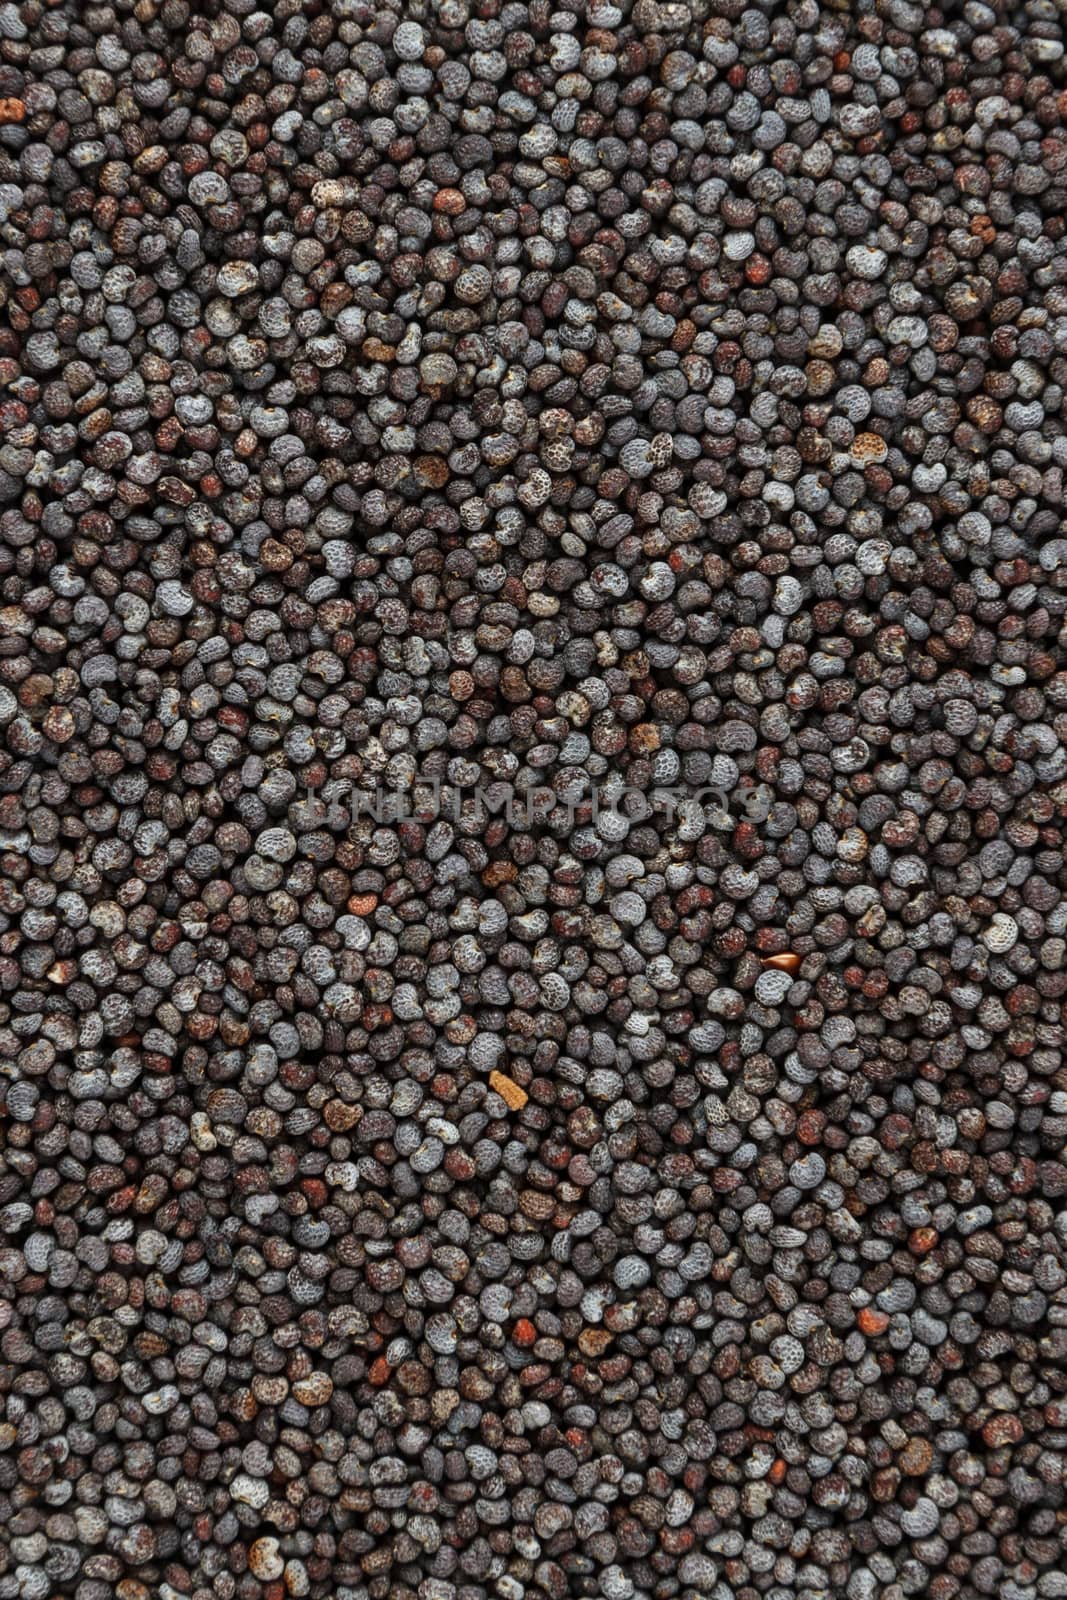 Close-up photograph of a spoonful of poppy seeds